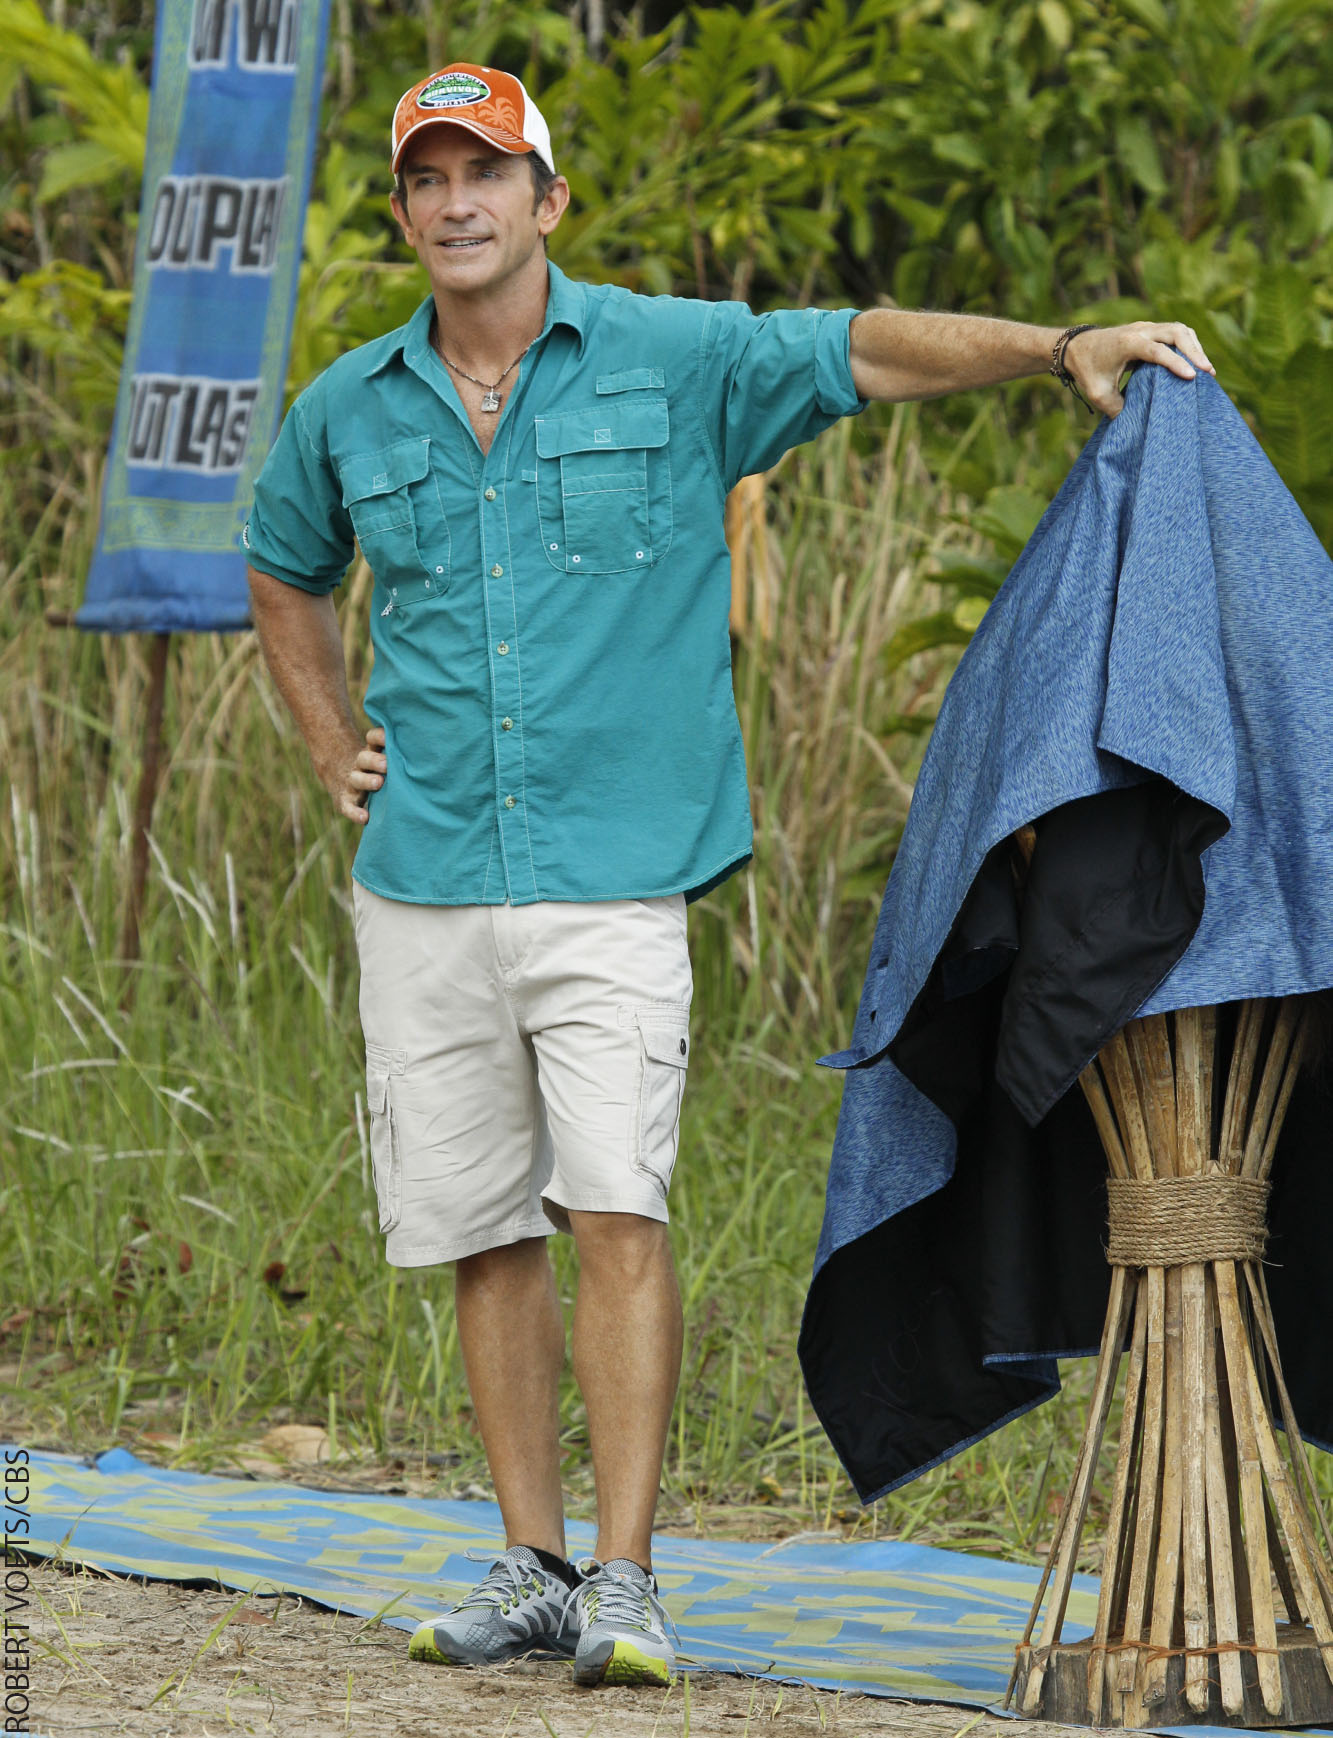 Jeff Probst’s Guide to Surviving the Entrepreneurial Jungle